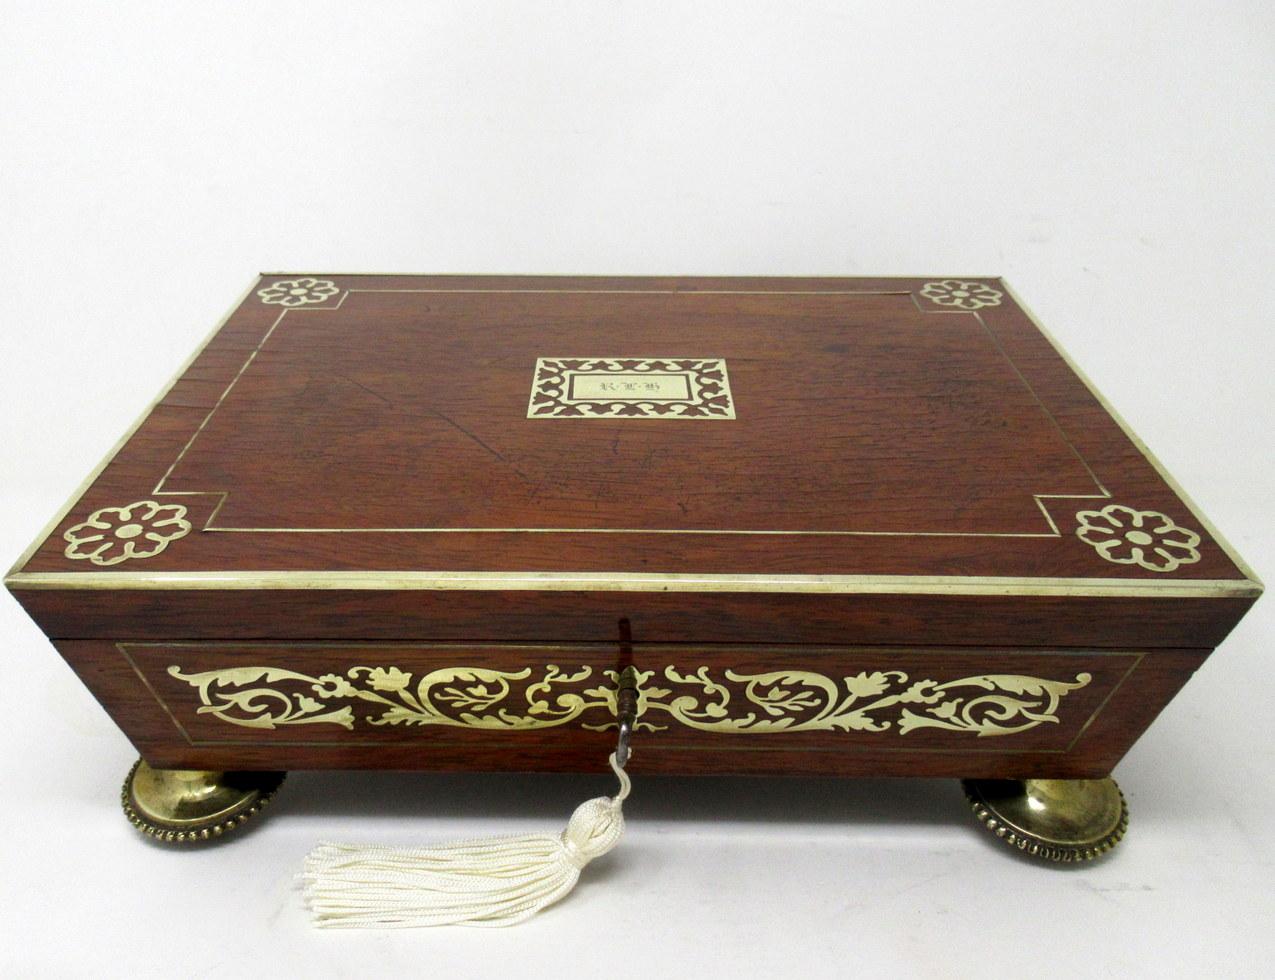 Antique English Regency Brass Inlaid Mahogany Jewellery Trinket Box Casket 19 Ct In Good Condition For Sale In Dublin, Ireland